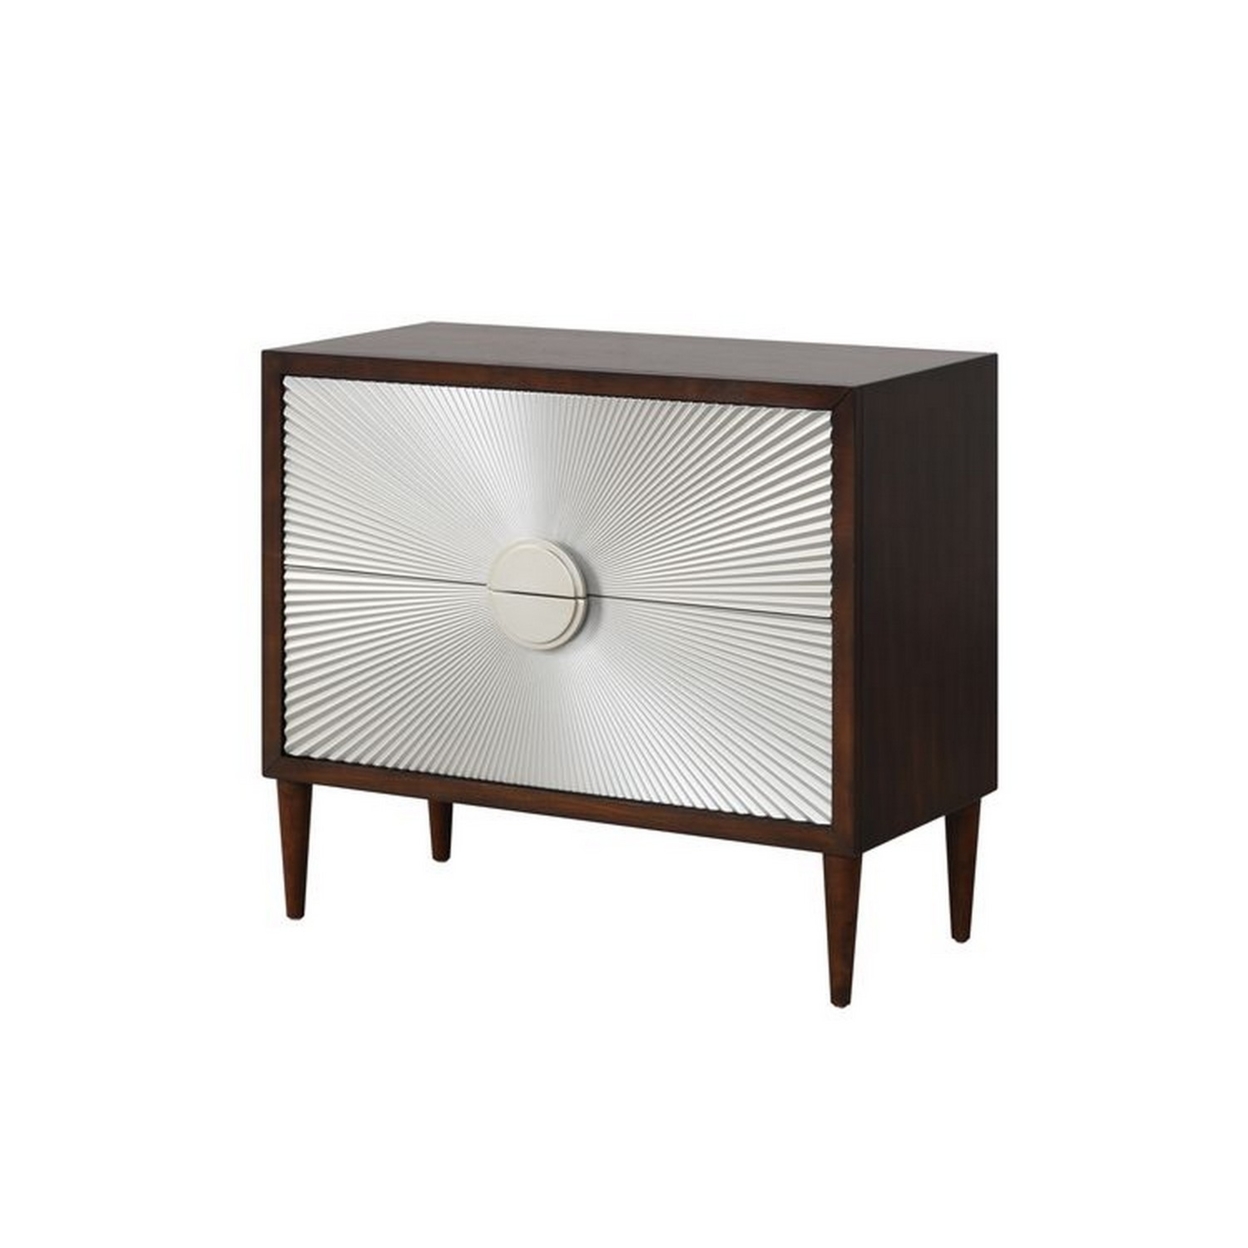 Accent Table With Sunburst Design 2 Drawer Front, Brown And White- Saltoro Sherpi